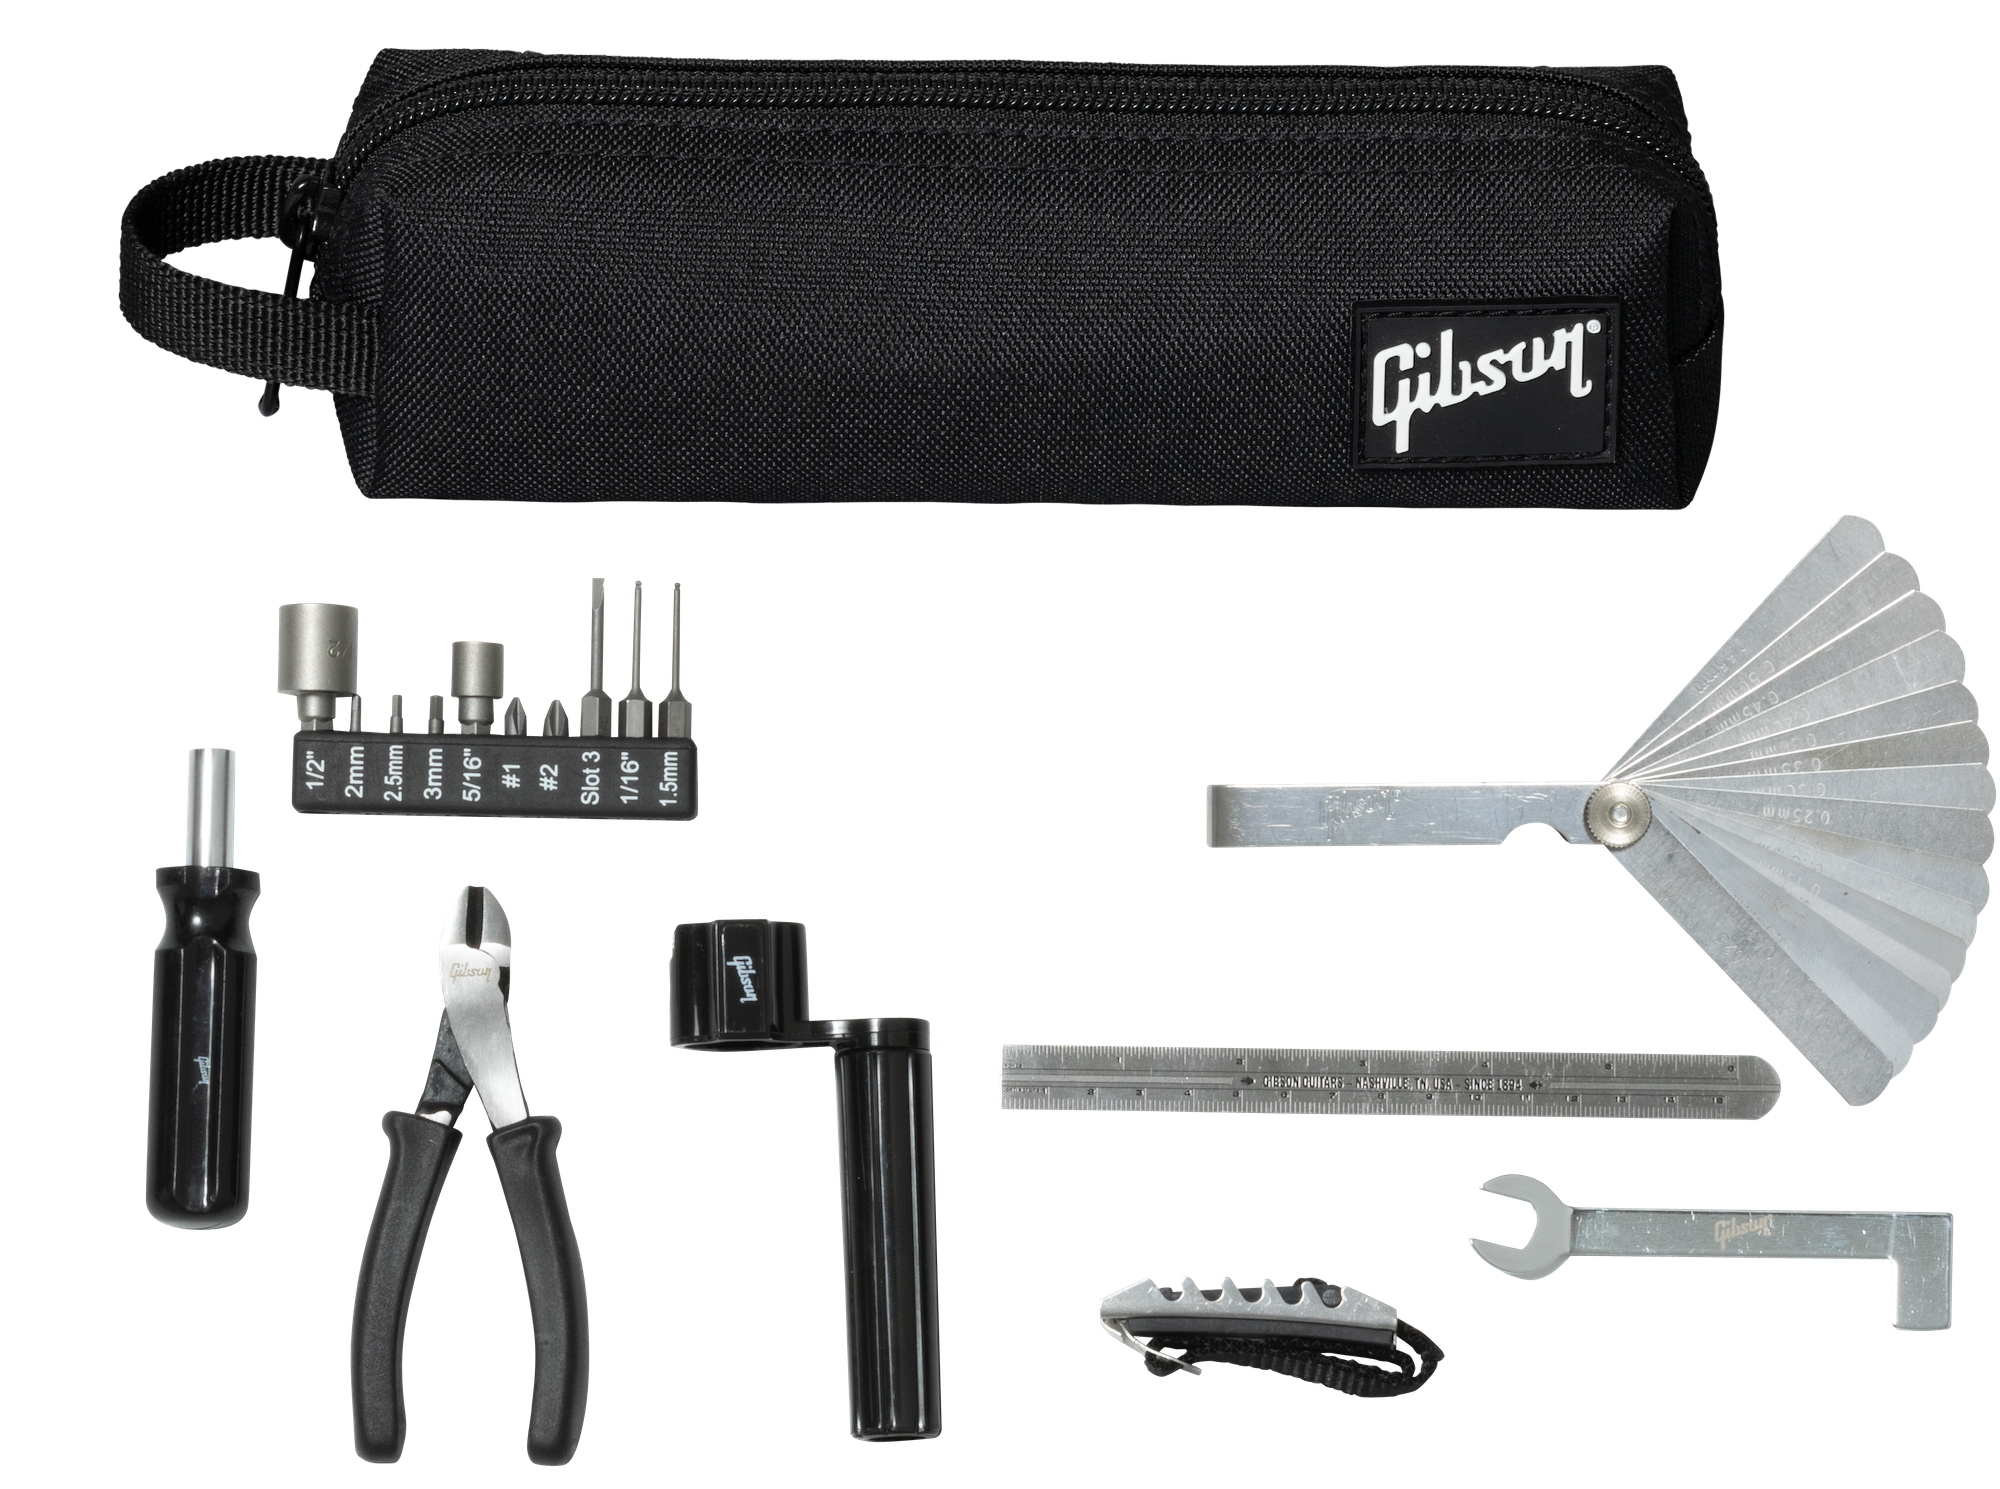 Gibson TK-01 Mobile Tech Toolkit Care